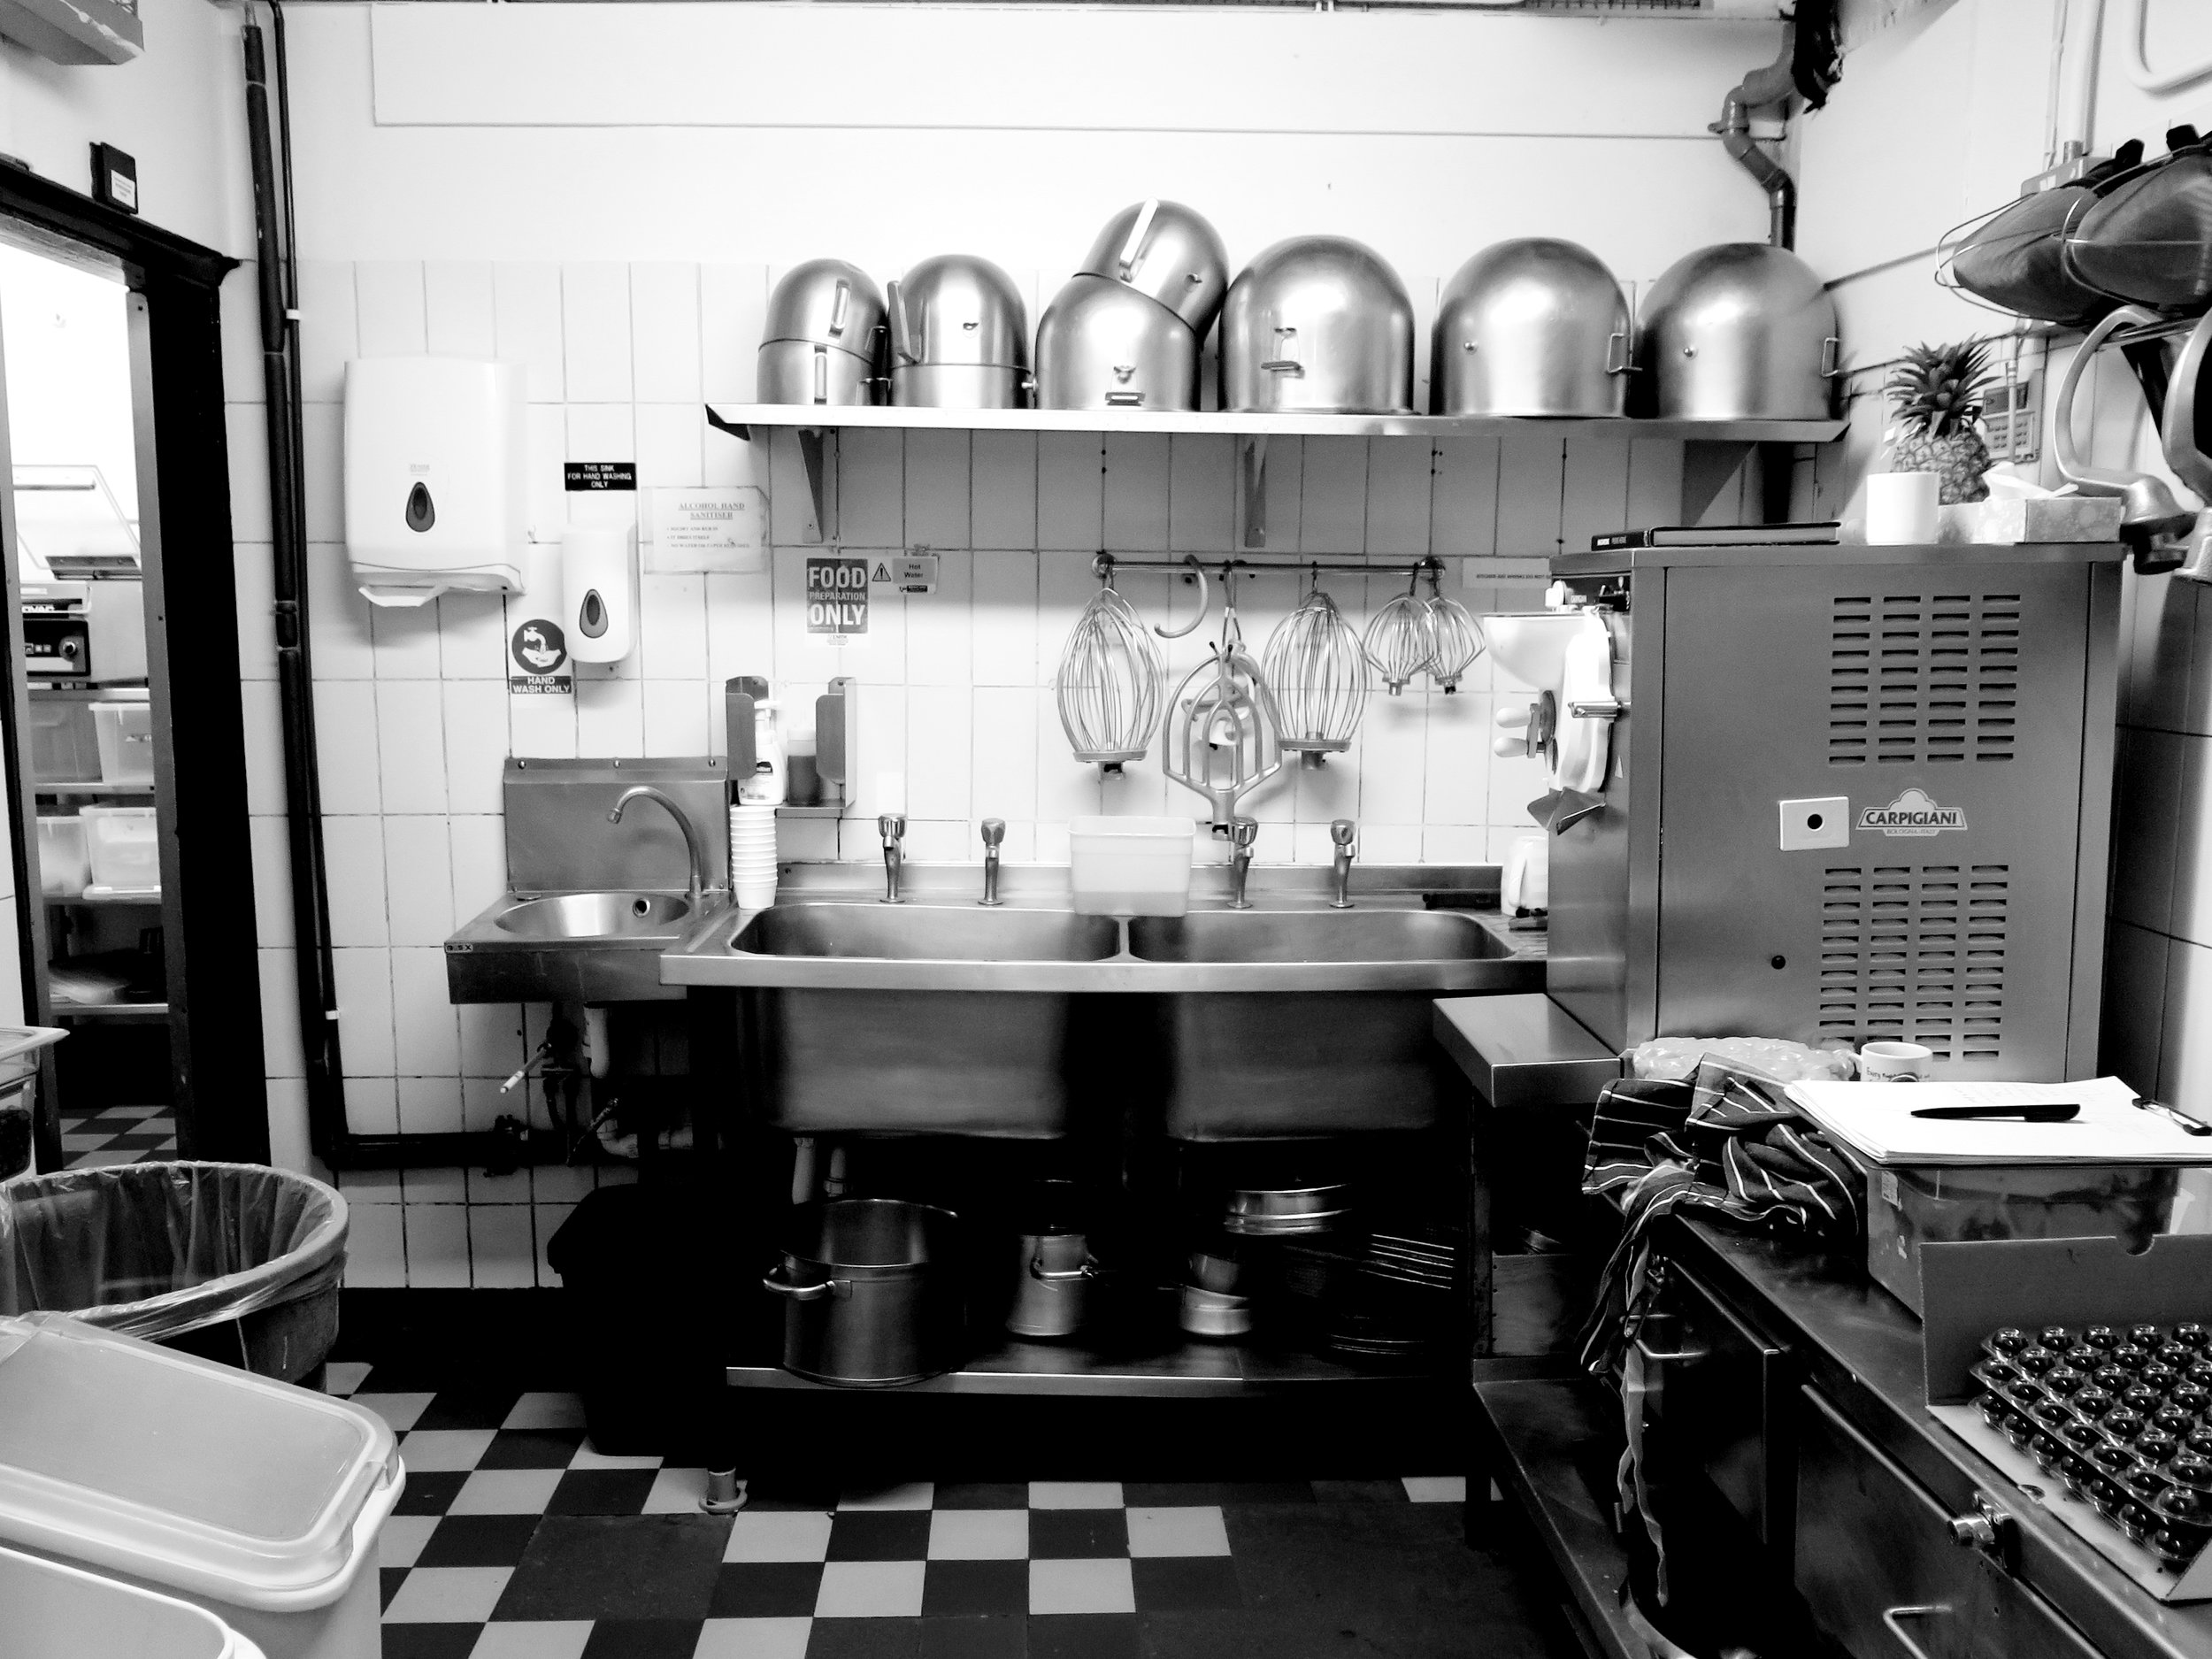 On the other side of the door : inside the kitchens of Le Caprice (Part 1)